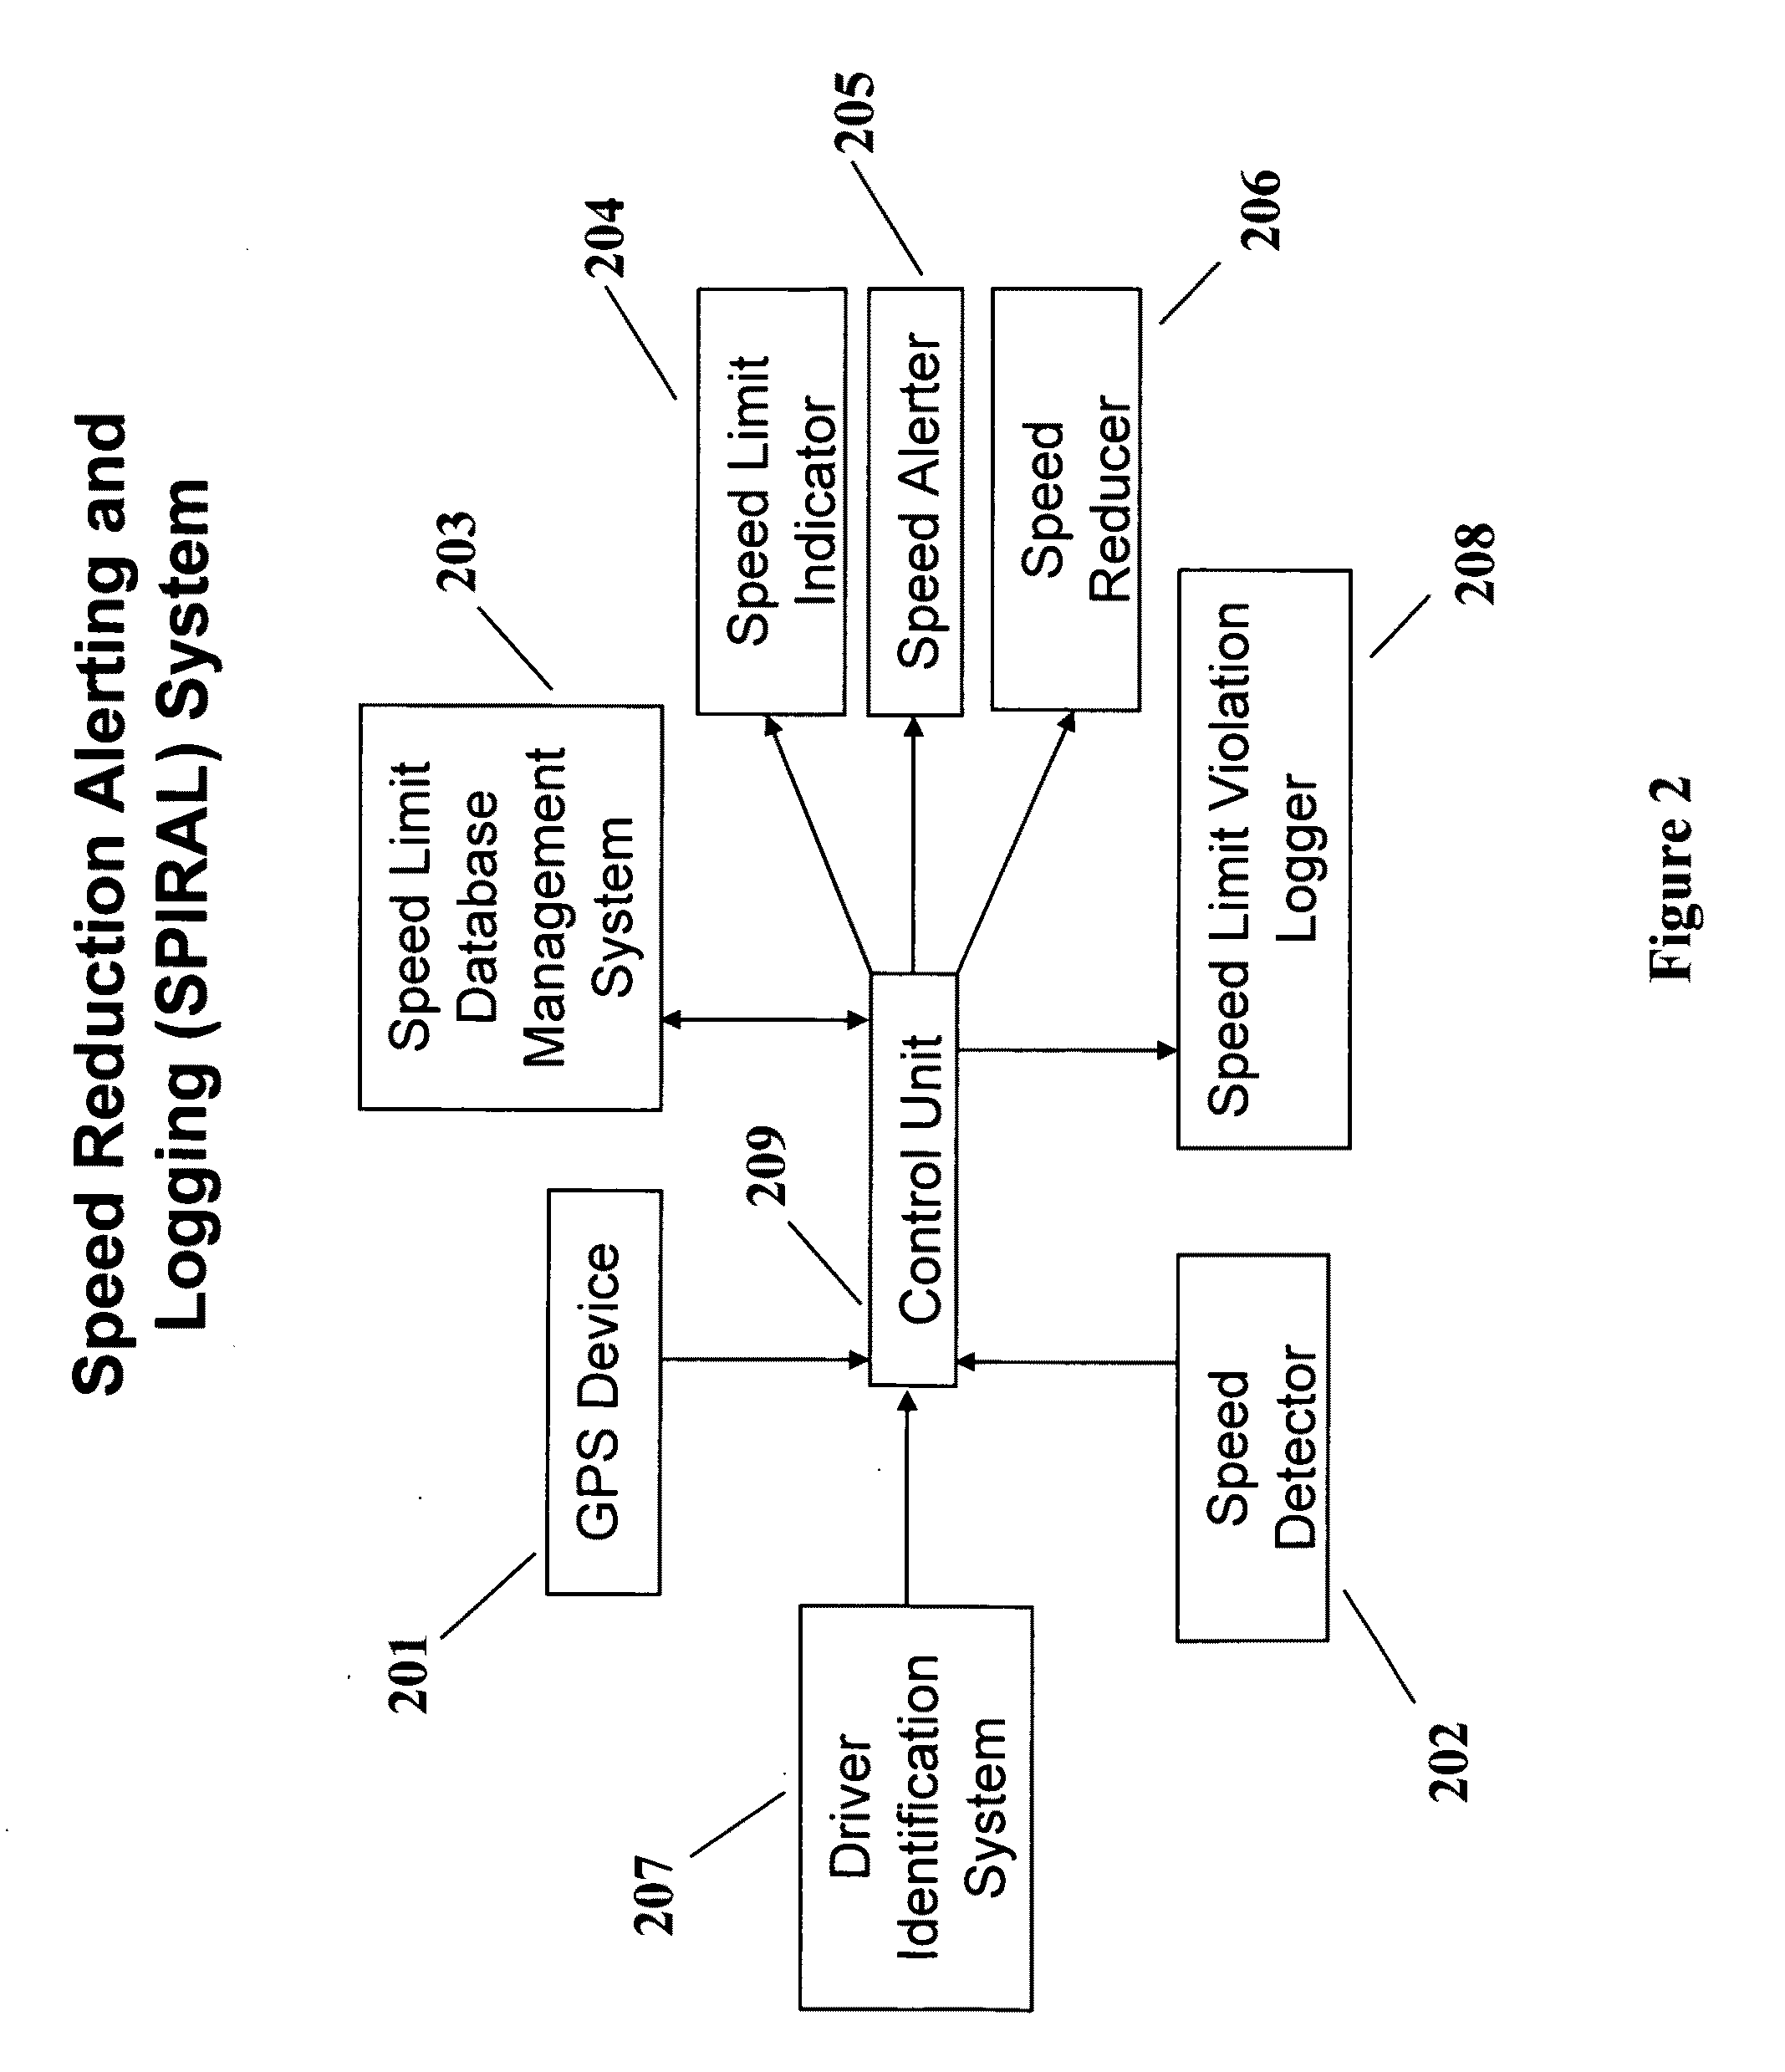 Speed reporting for providing conditional driver treatment